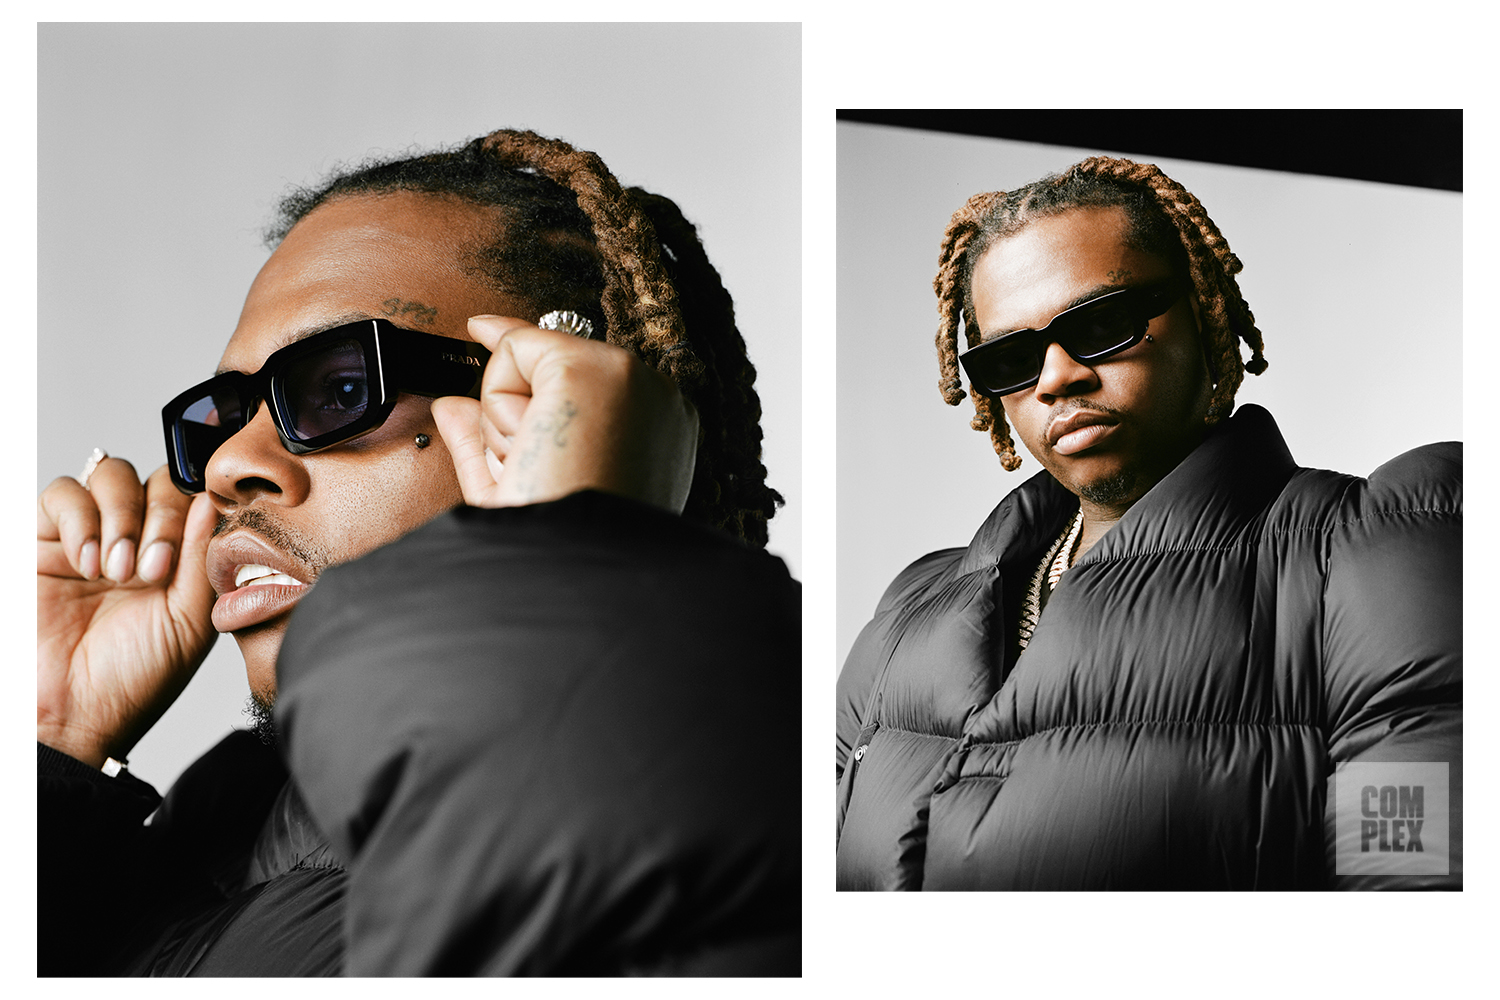 Gunna poses for Complex interview